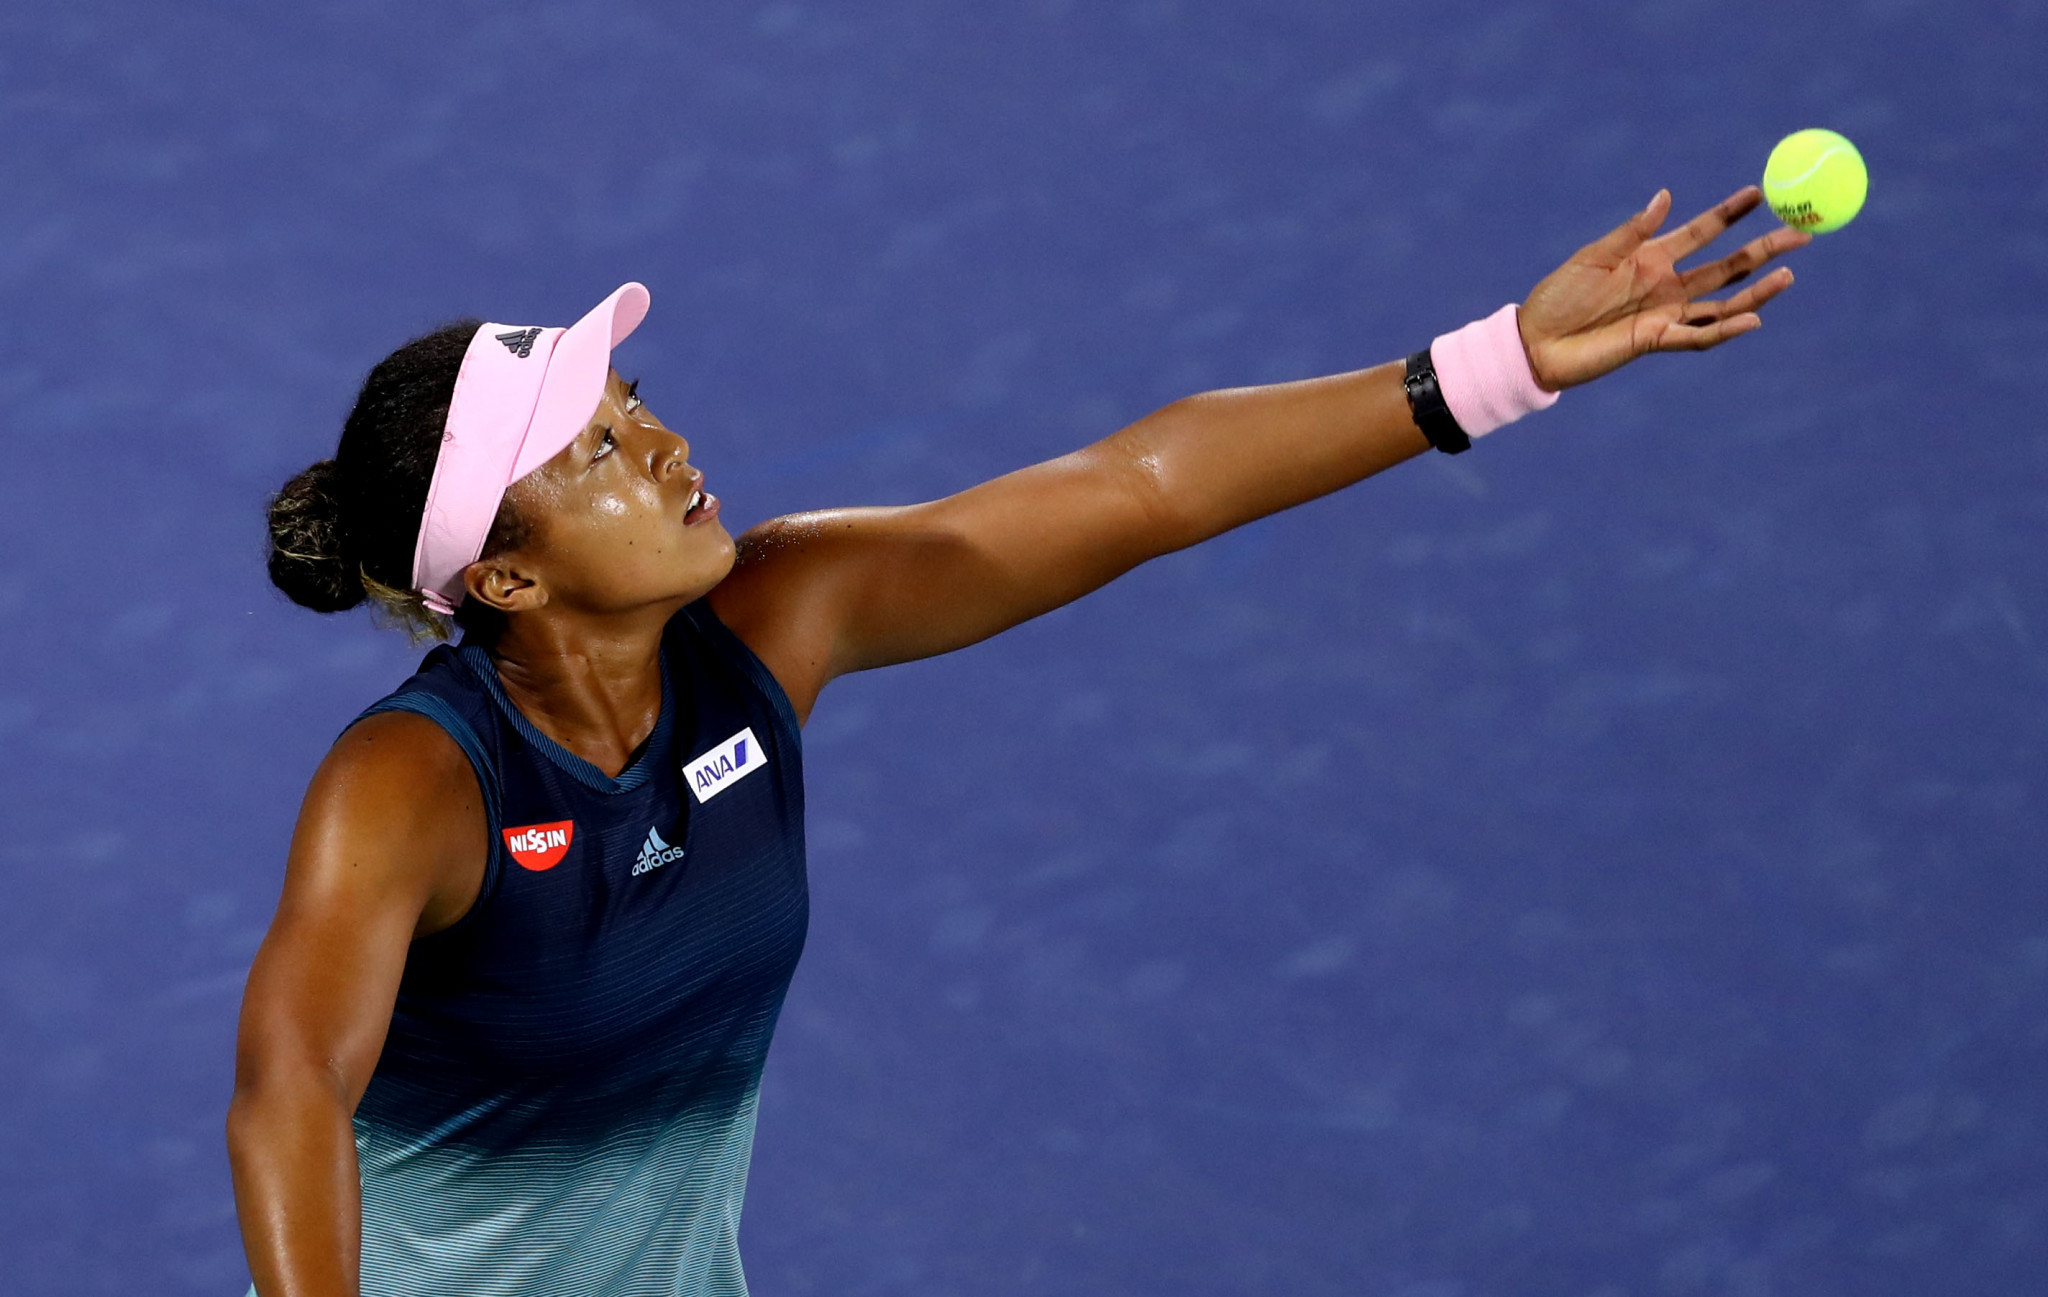 Naomi Osaka suffered defeat in her first match as world number one ©Getty Images